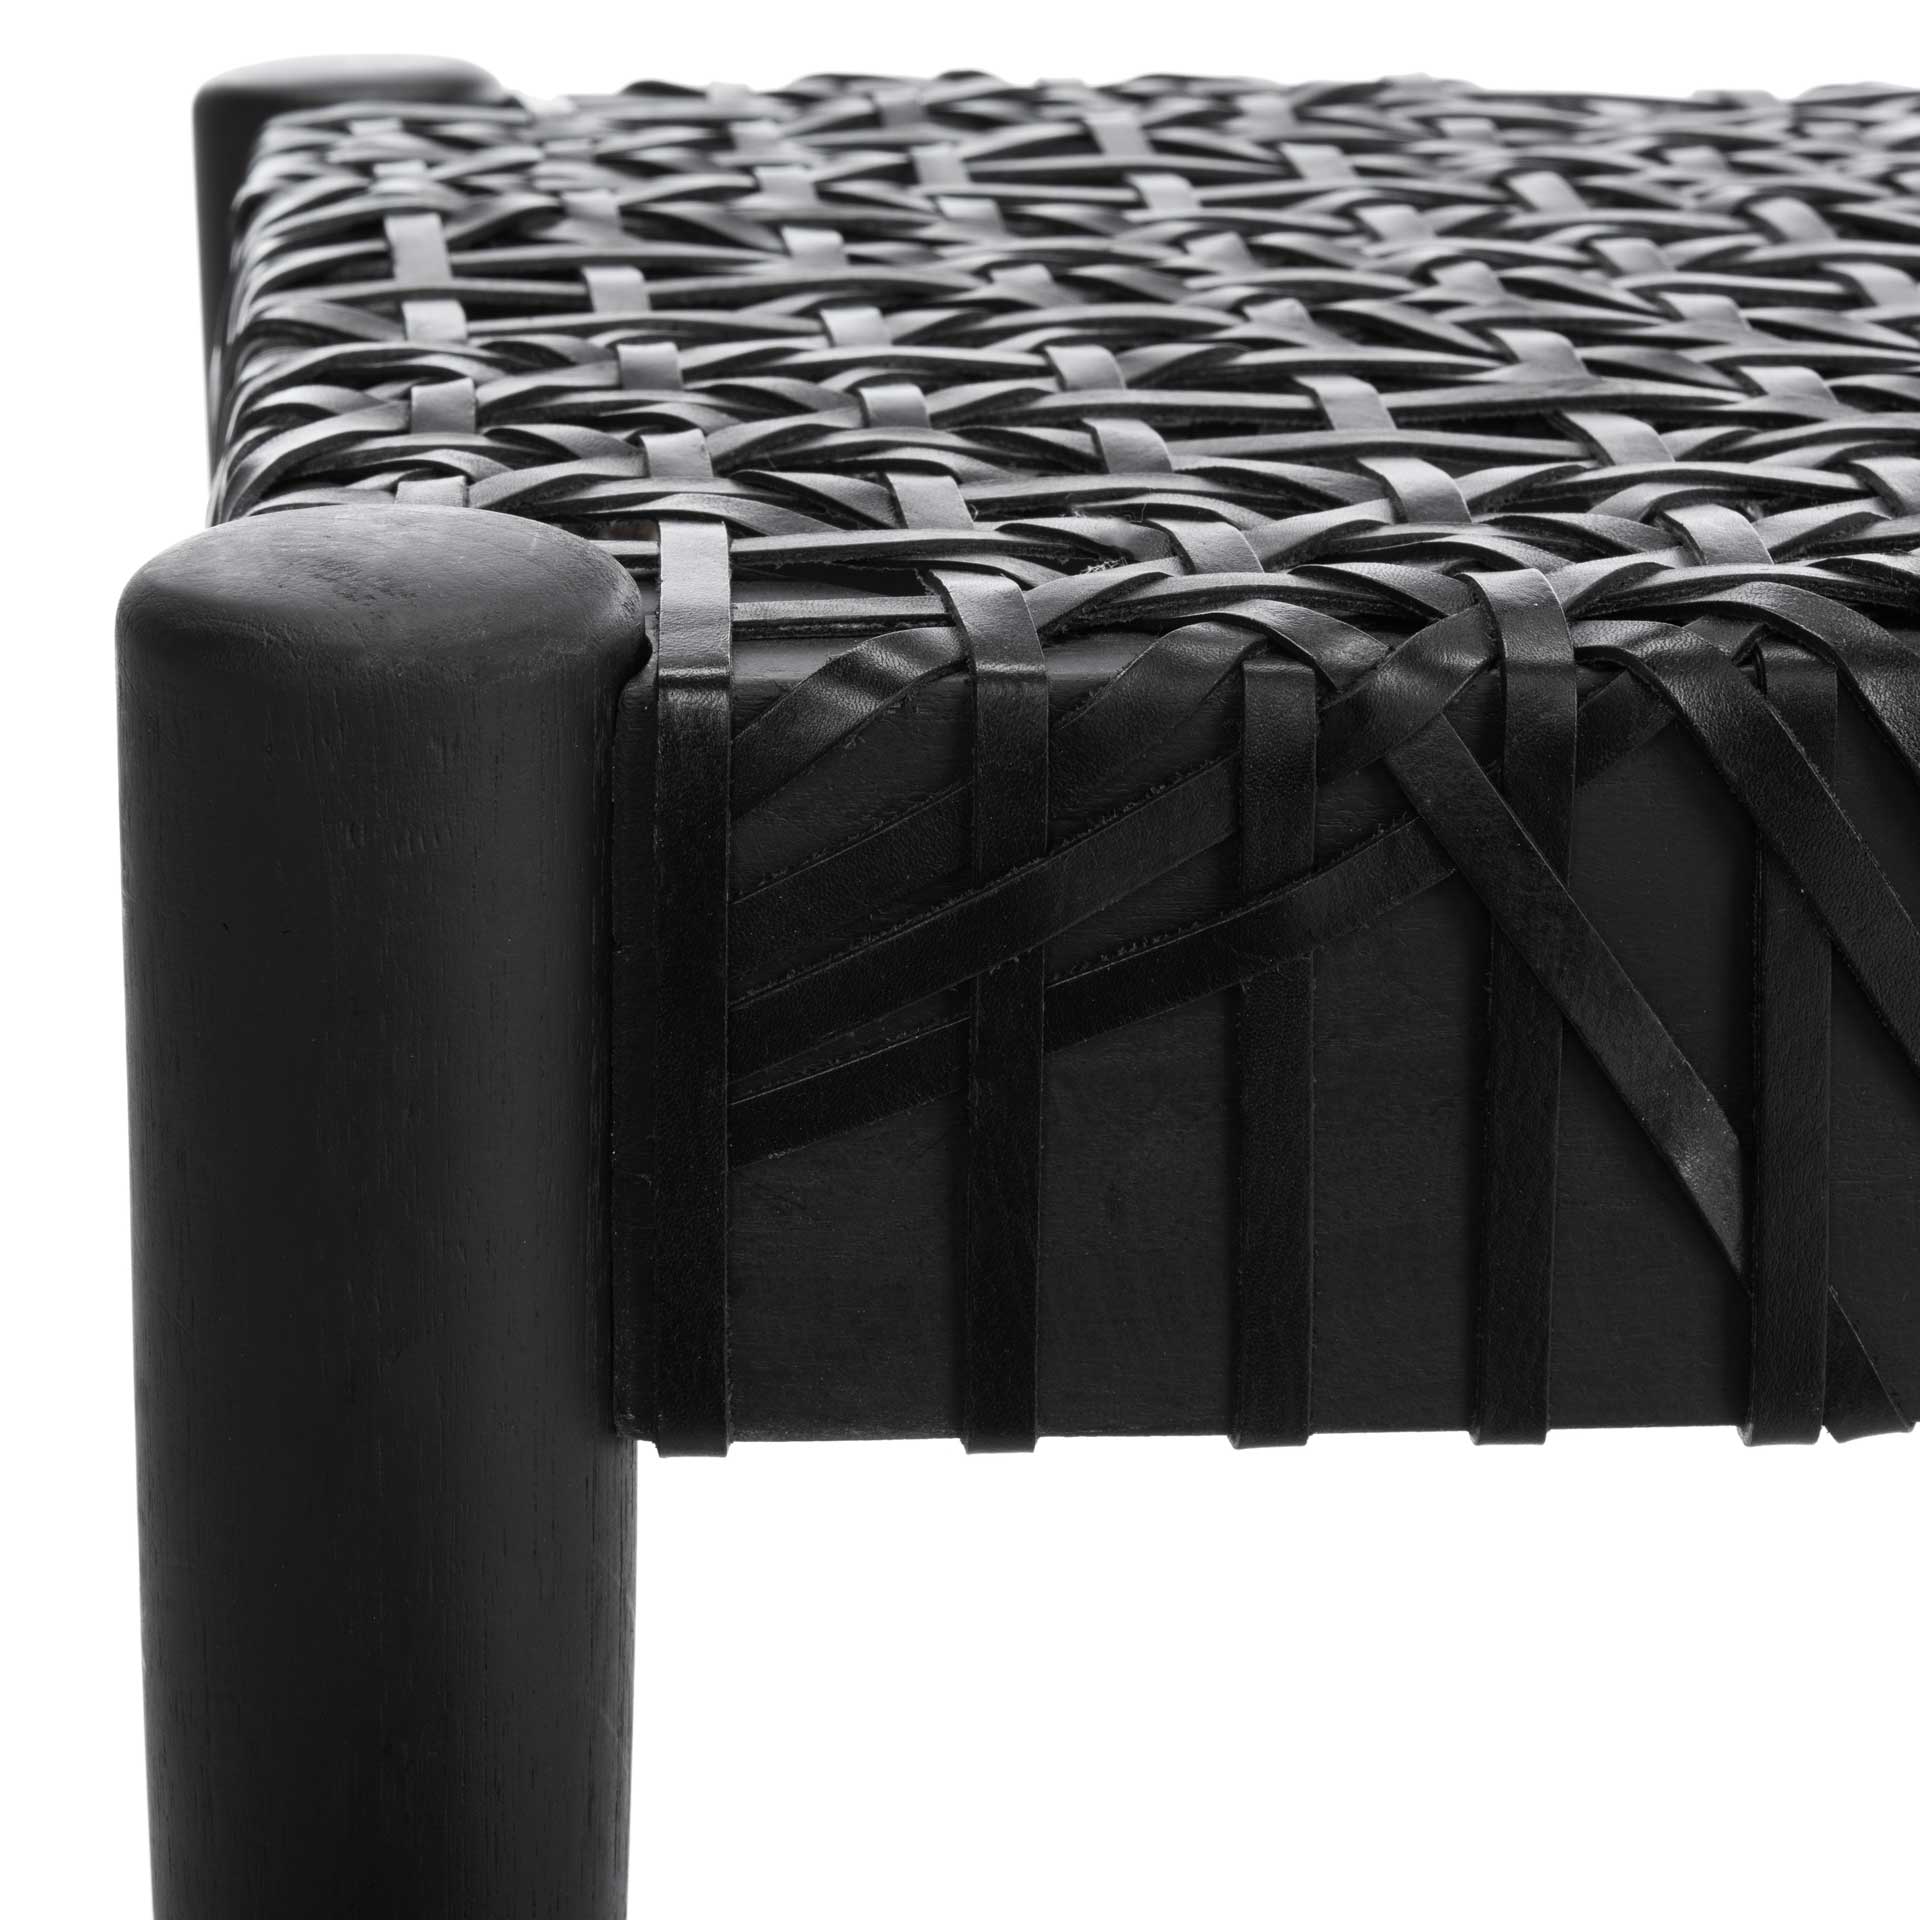 Baize Leather Weave Bench Black/Black